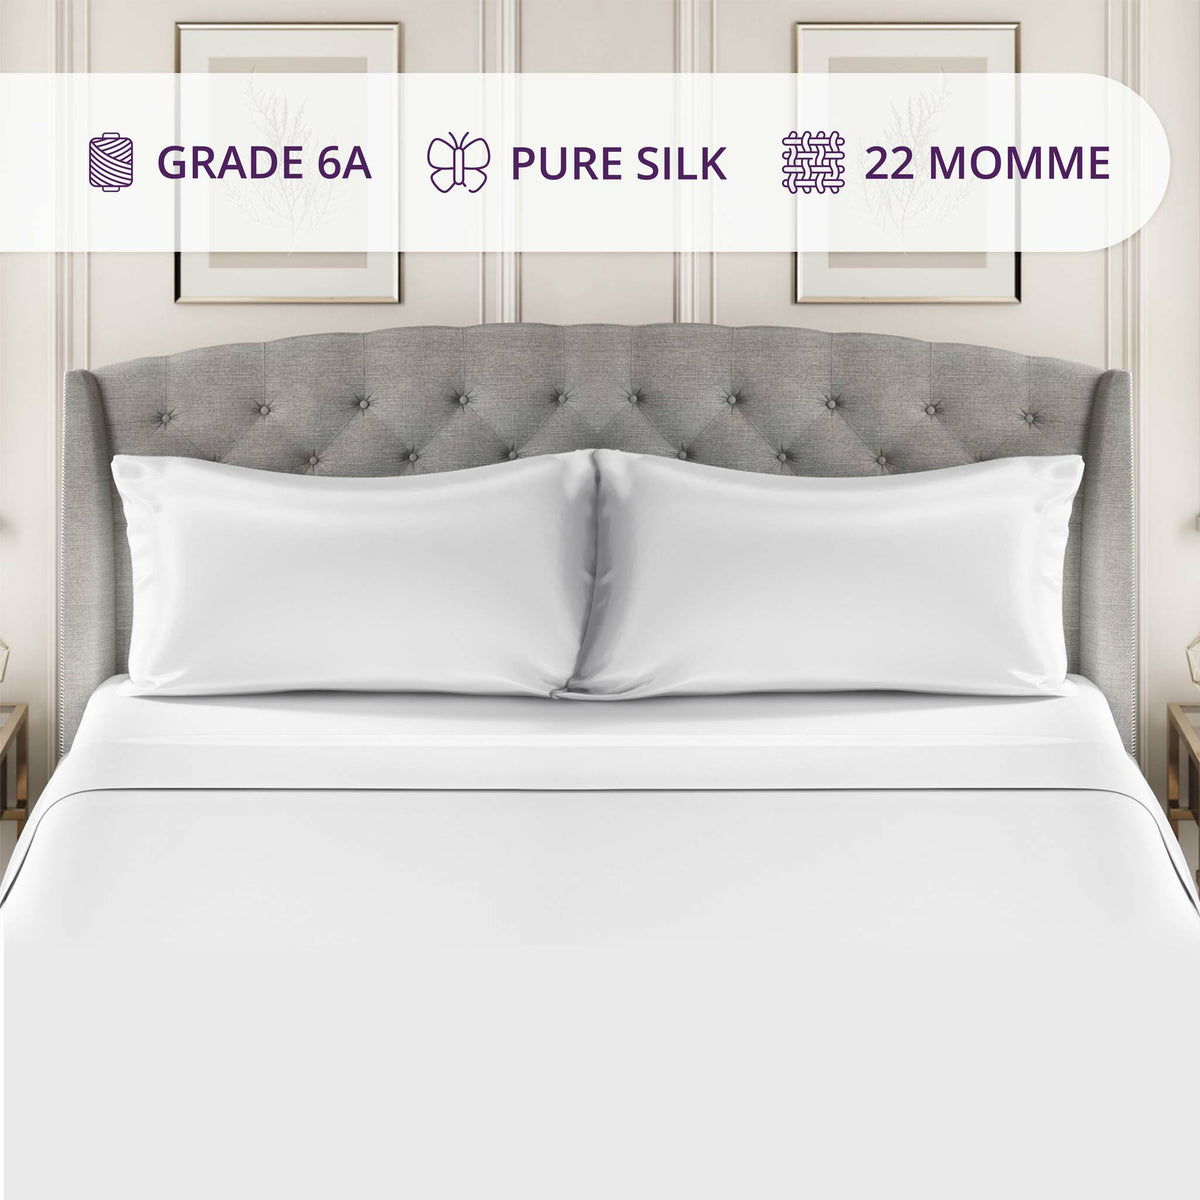 Silk Sheet Set Features 22 Momme White Fine Linens